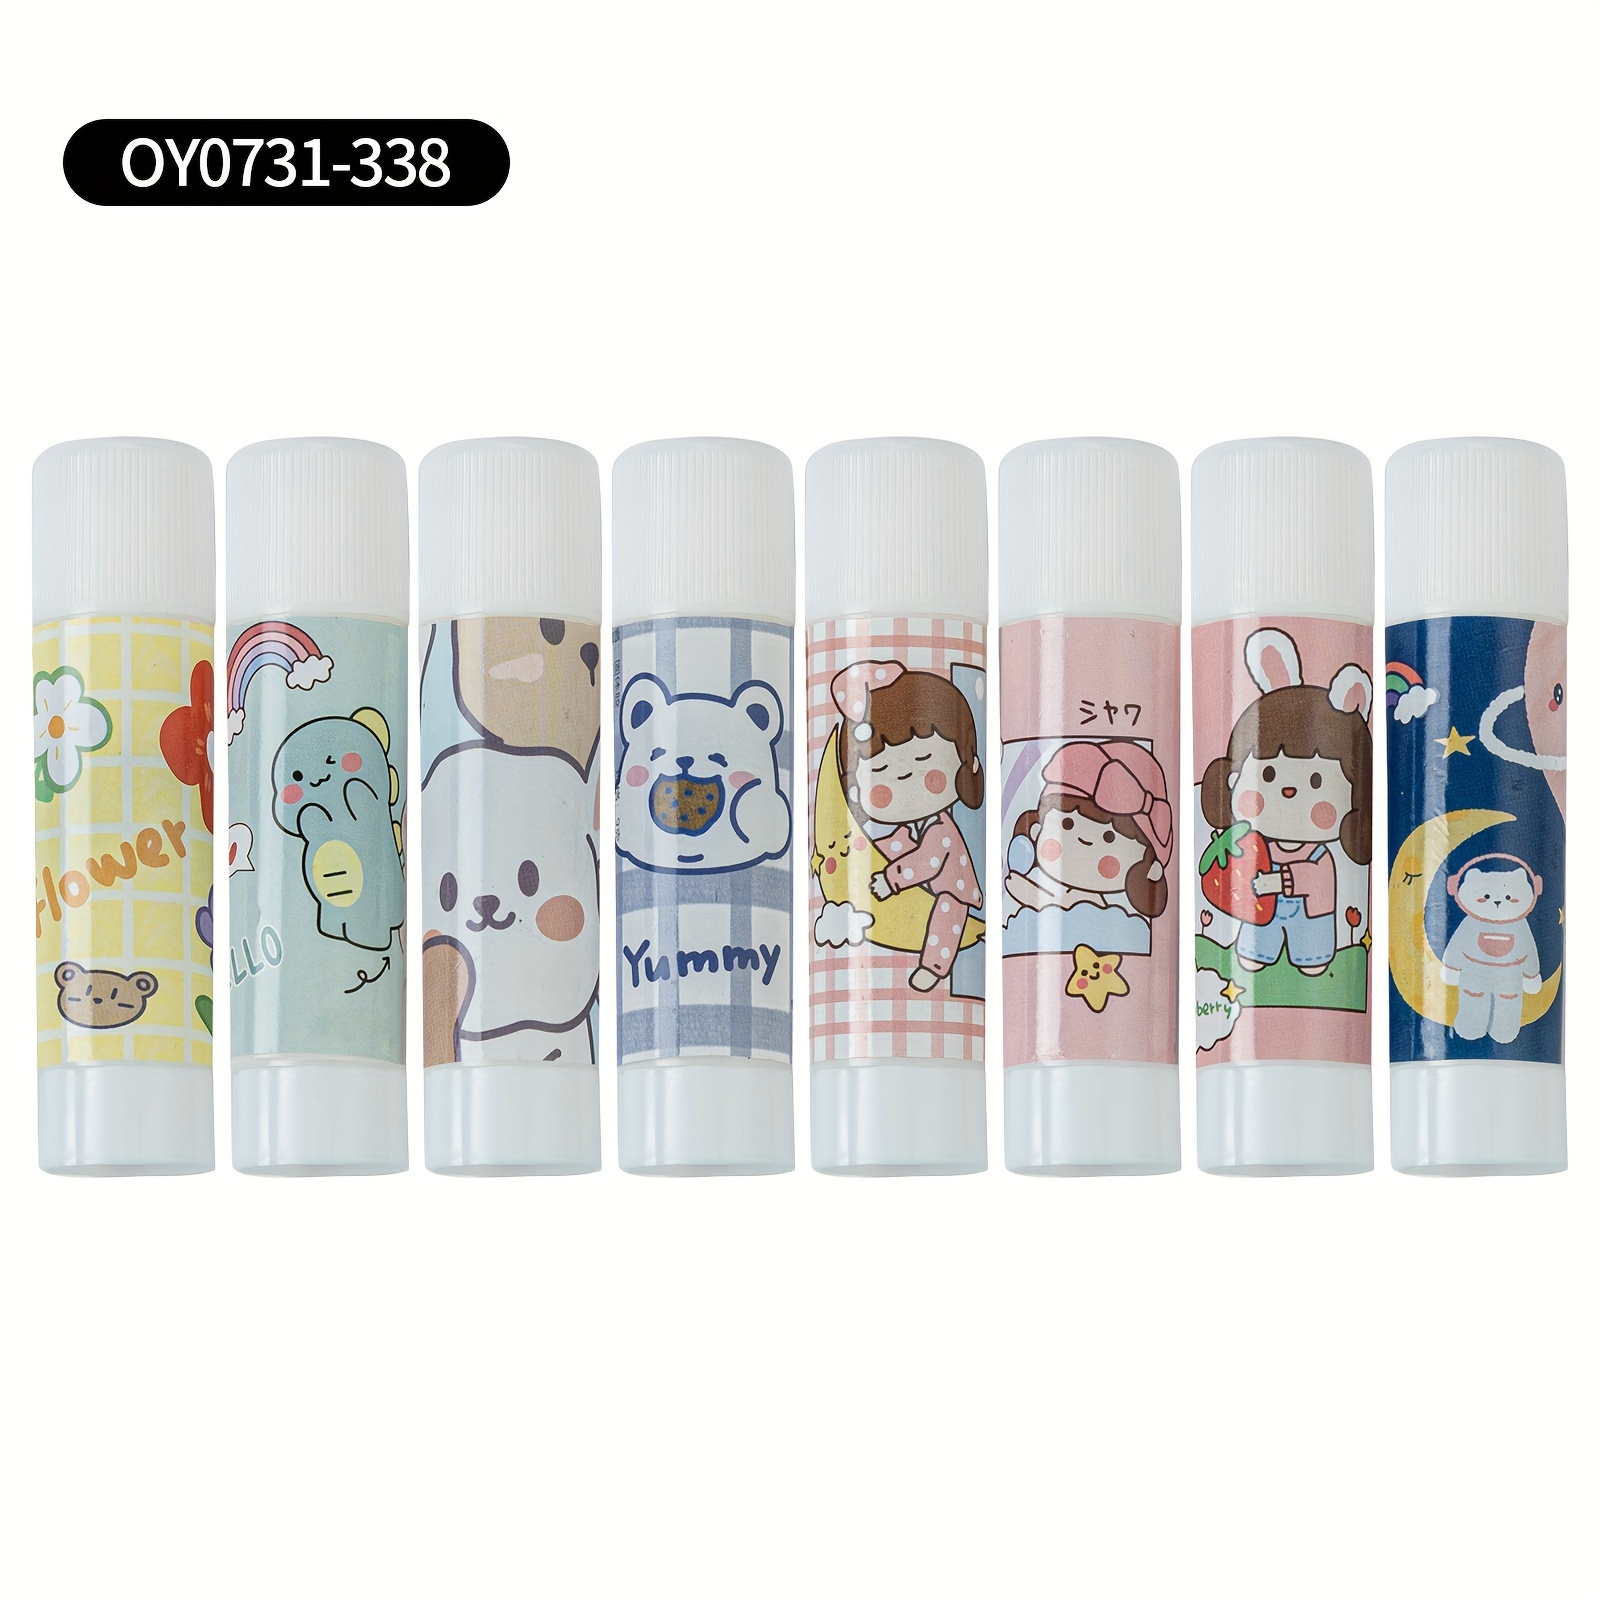 1 Pack Of Learning Stationery Solid Glue Stick, Bulk Solid Glue, Office  Supplies Solid Glue, Primary School Students Learning Stationery Glue Stick